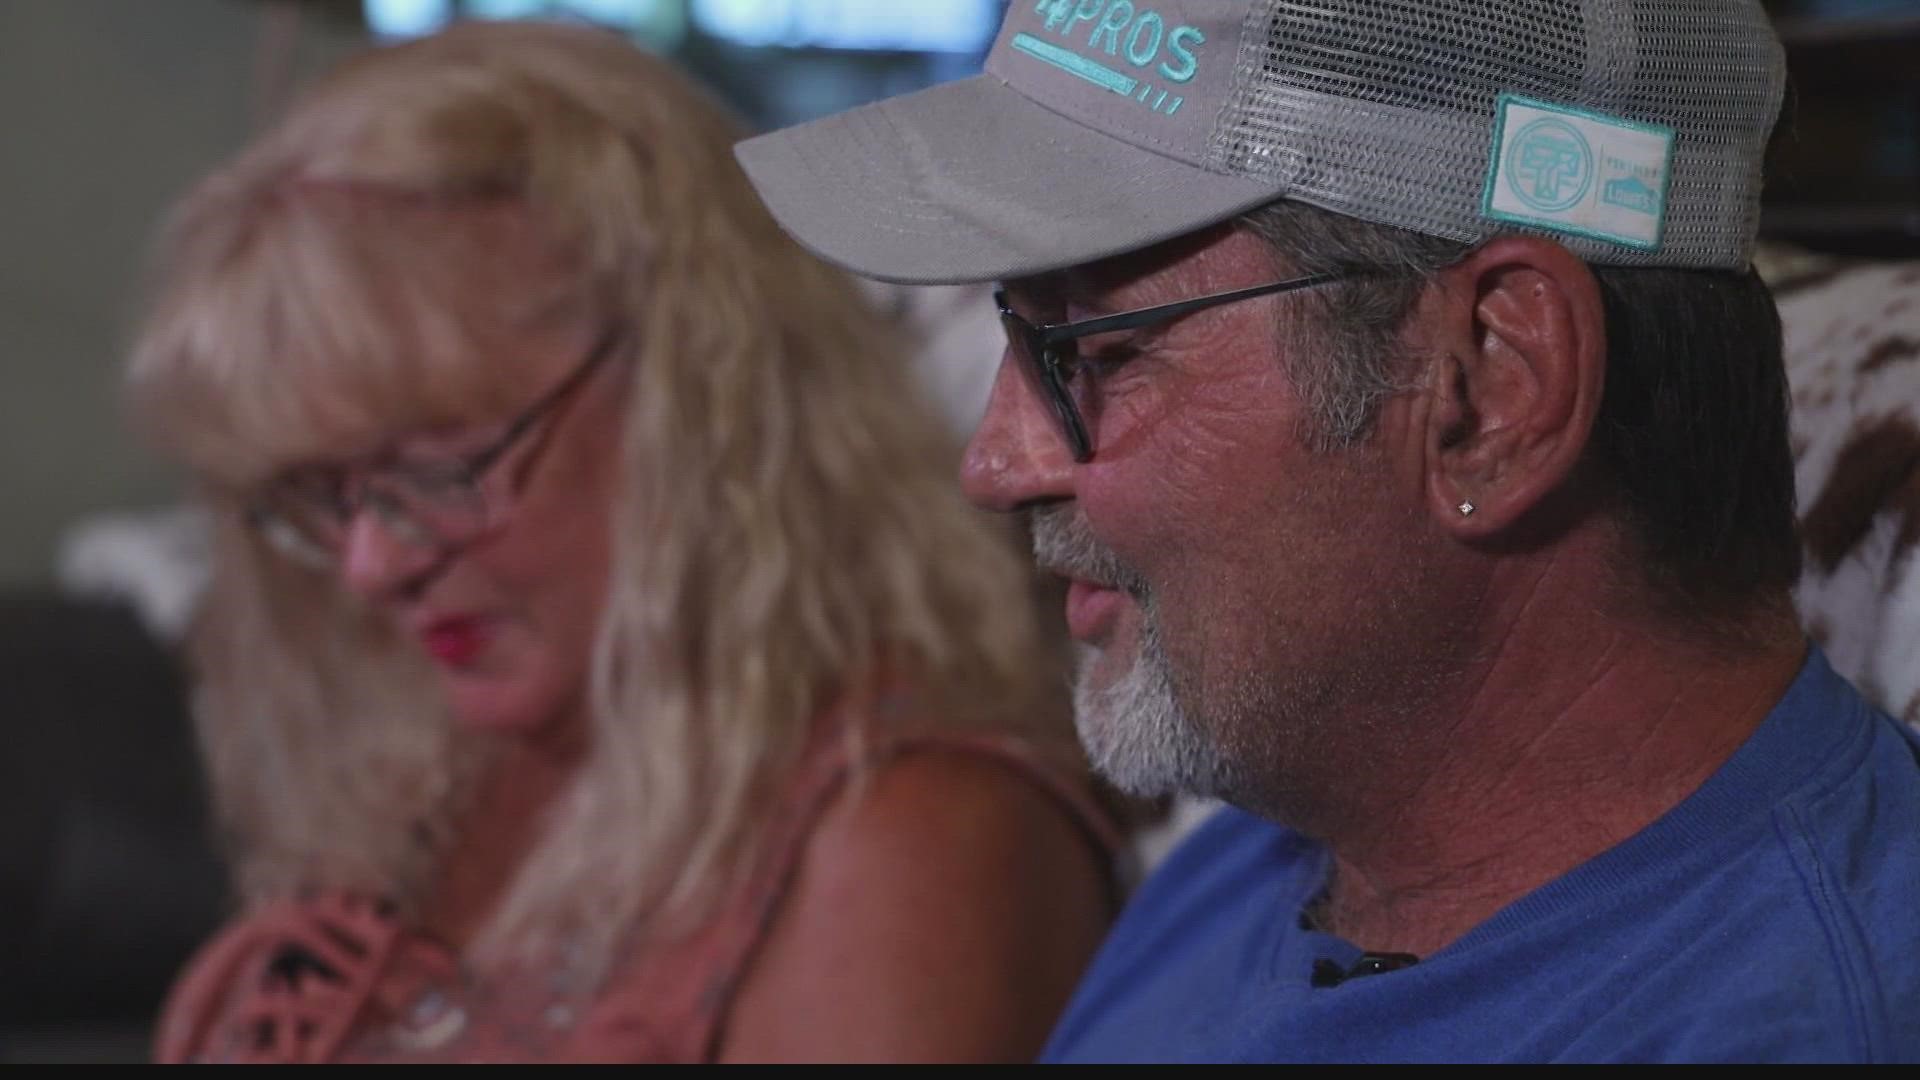 First Coast News first aired the story of Jim and Valerie Taylor on Monday. After we reported on the issue, VyStar called them with an apology.